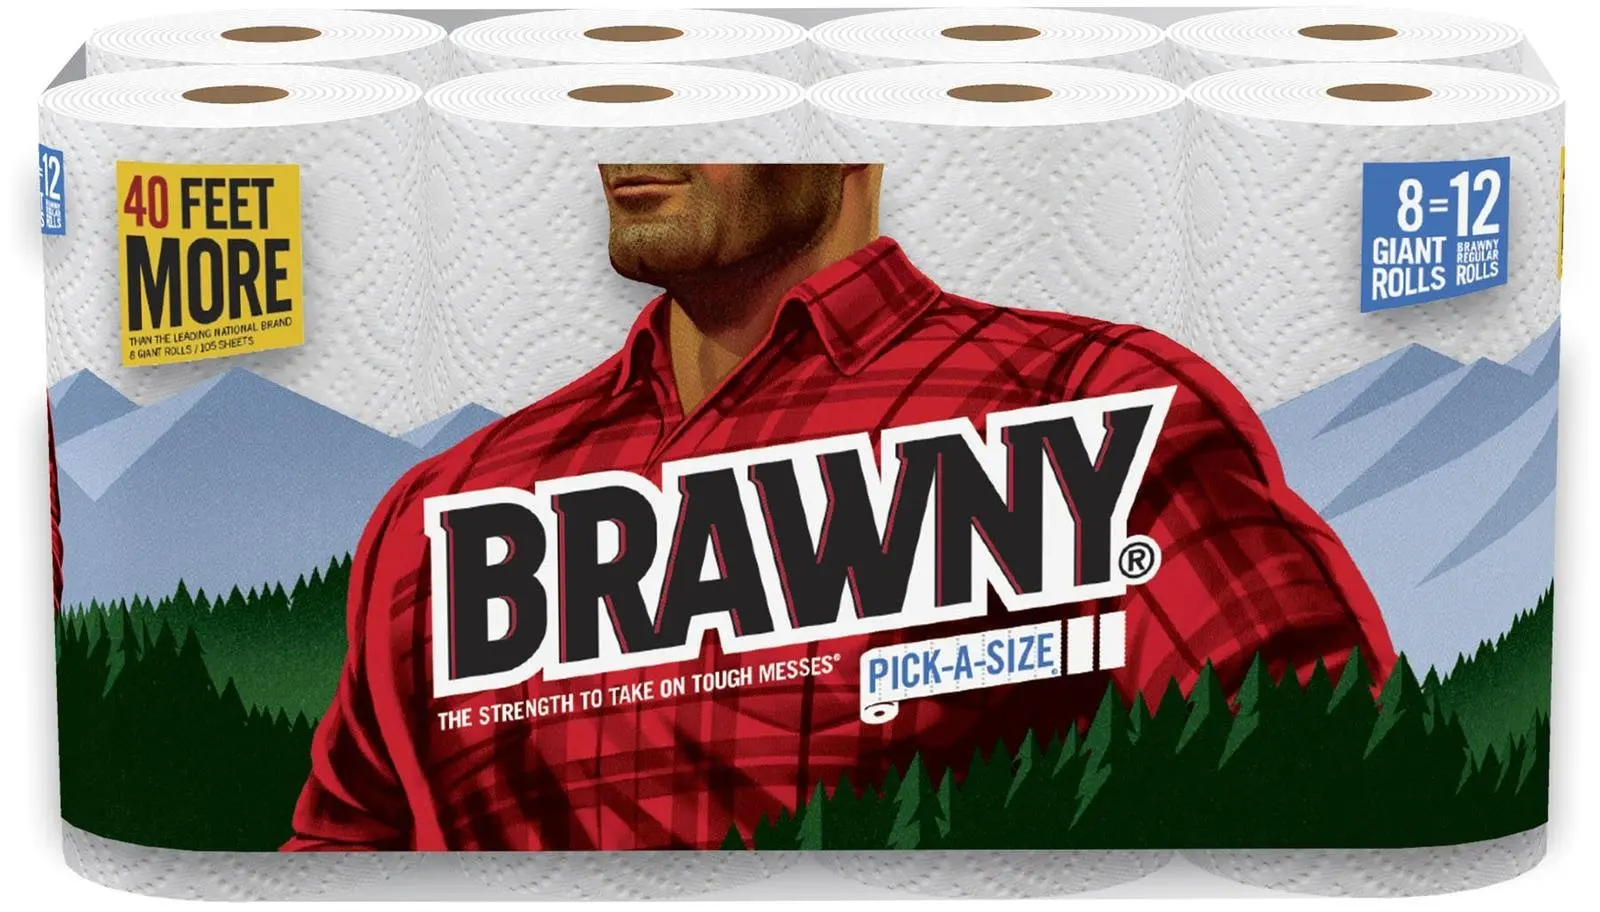 Brawny Paper Towels, Pick-A-Size, Giant Roll, White - 8 Pack. 